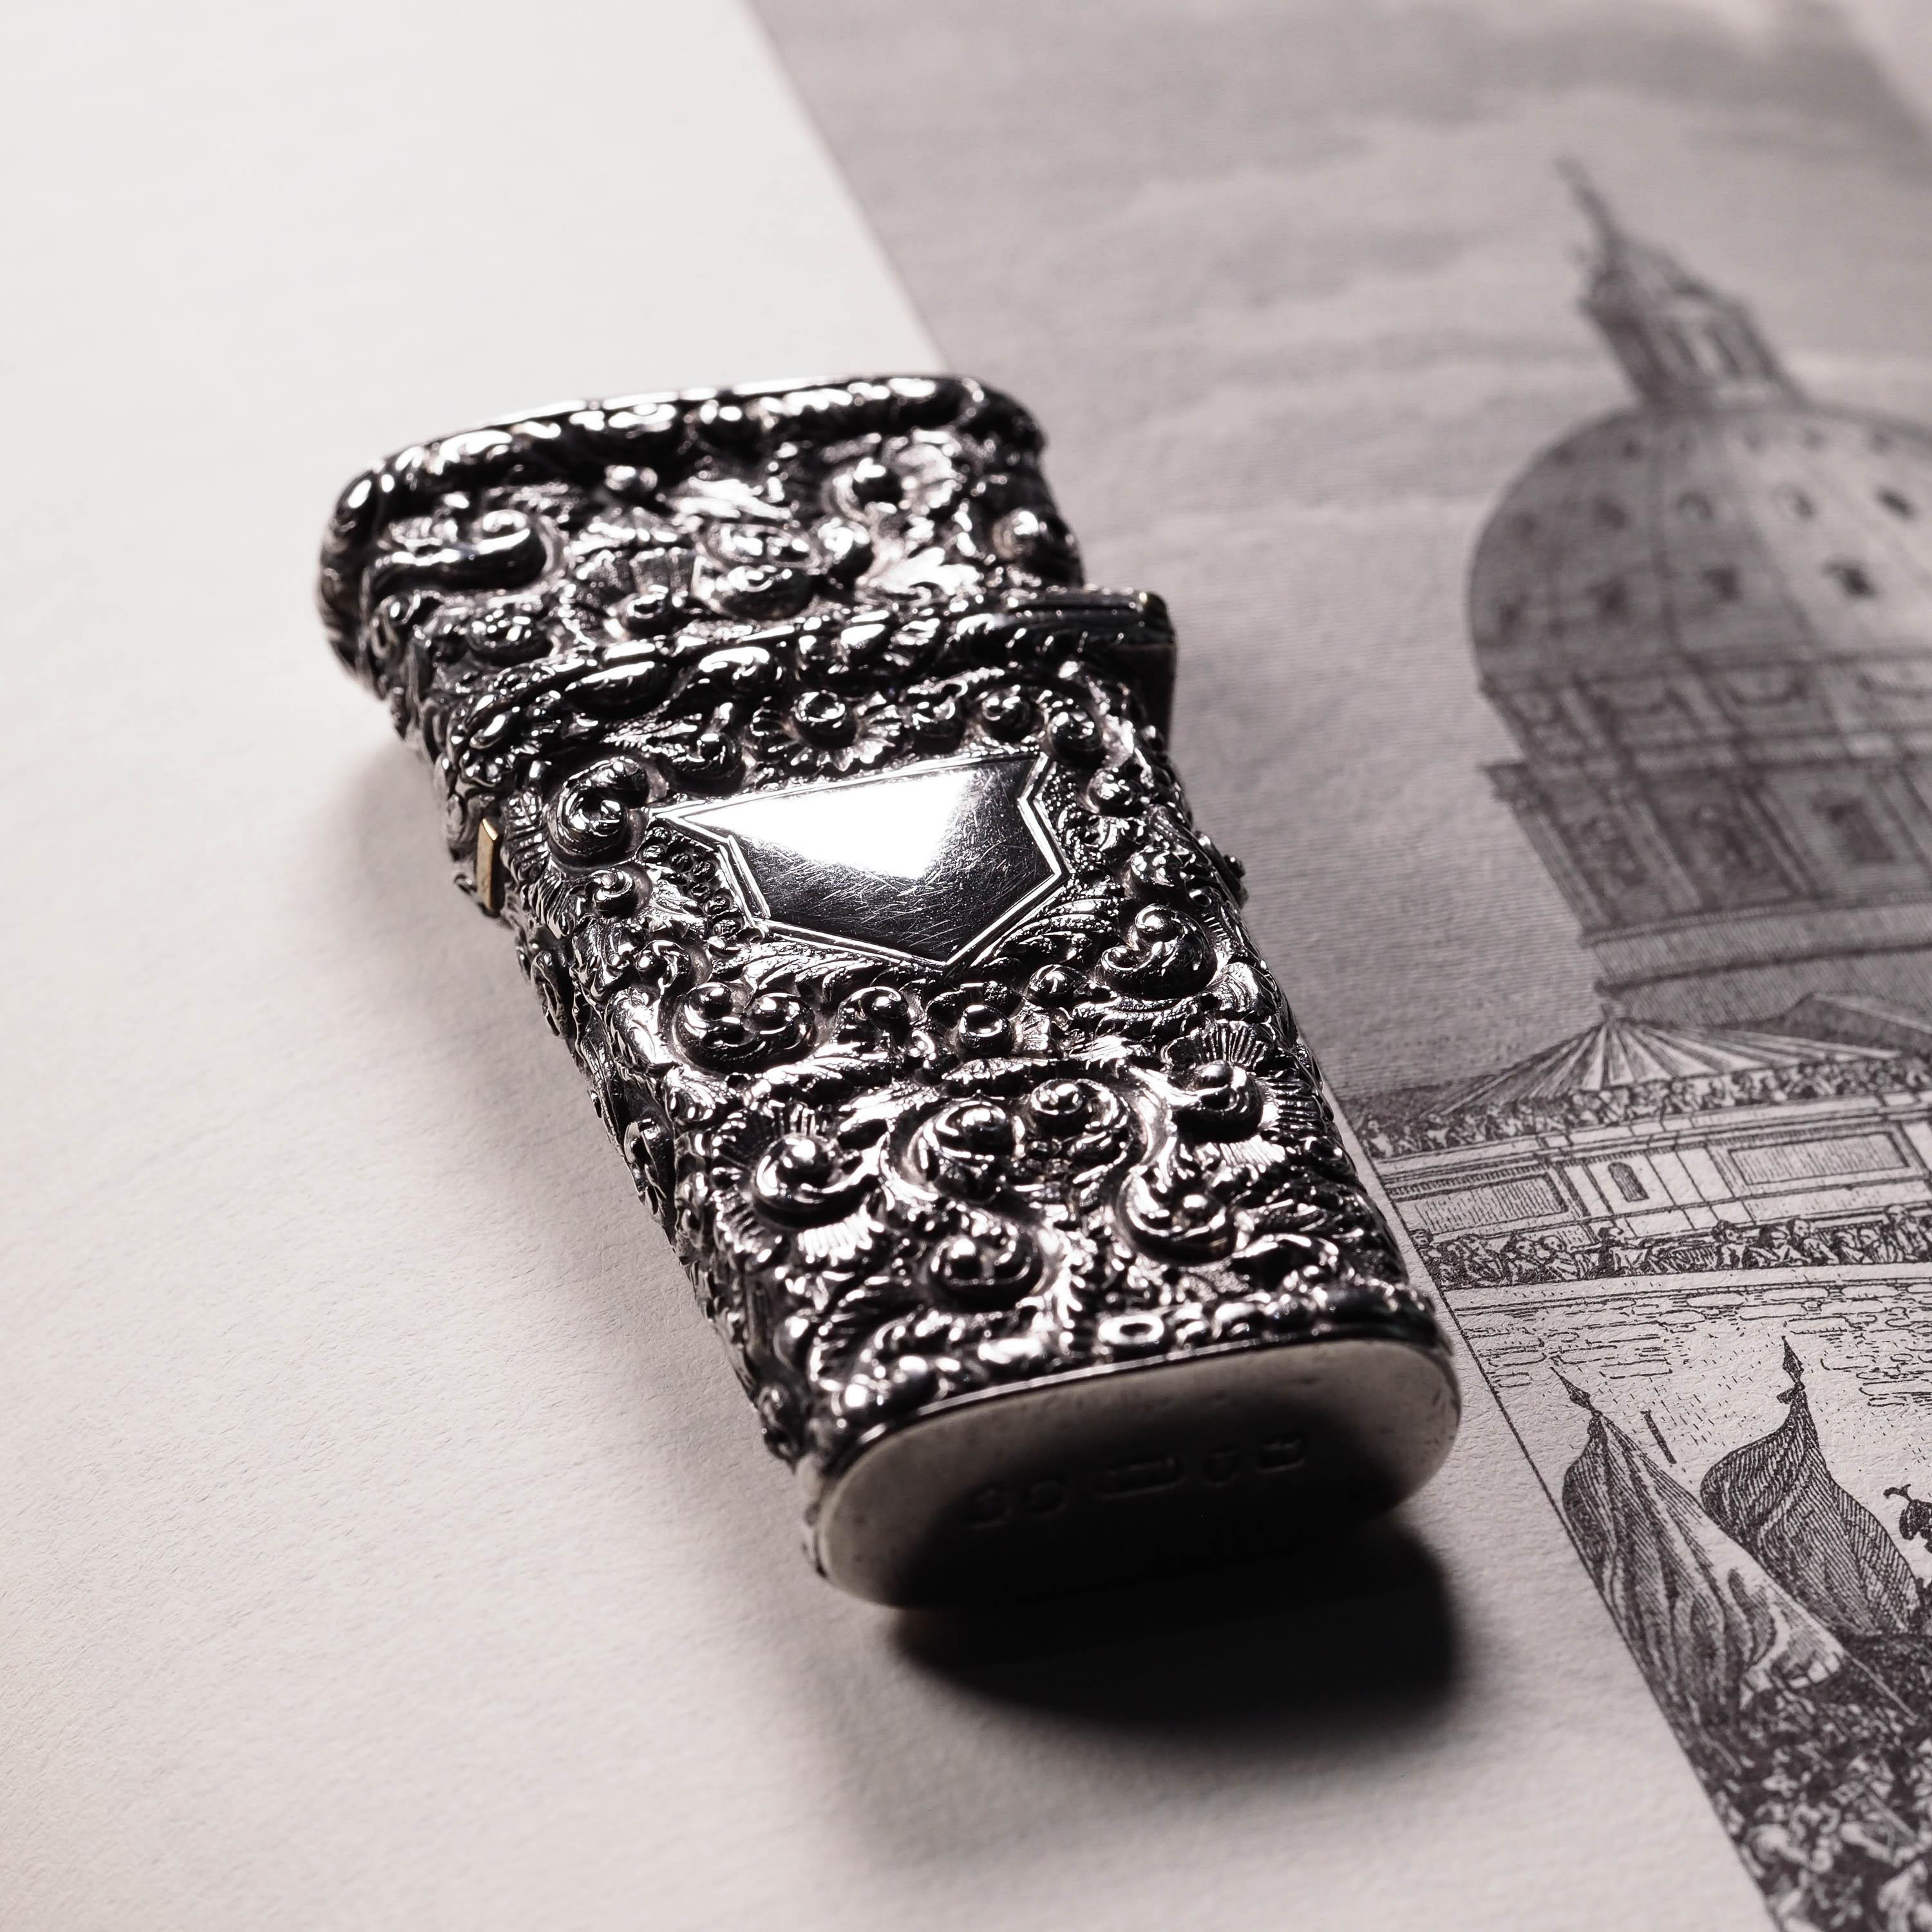 We are delighted to offer this wonderful Georgian solid silver etui/needle case with the marks of Taylor & Perry, Birmingham 1830.The small proportions and shape are quite charming and modest, yet the level of intricacy and embellishments are quite